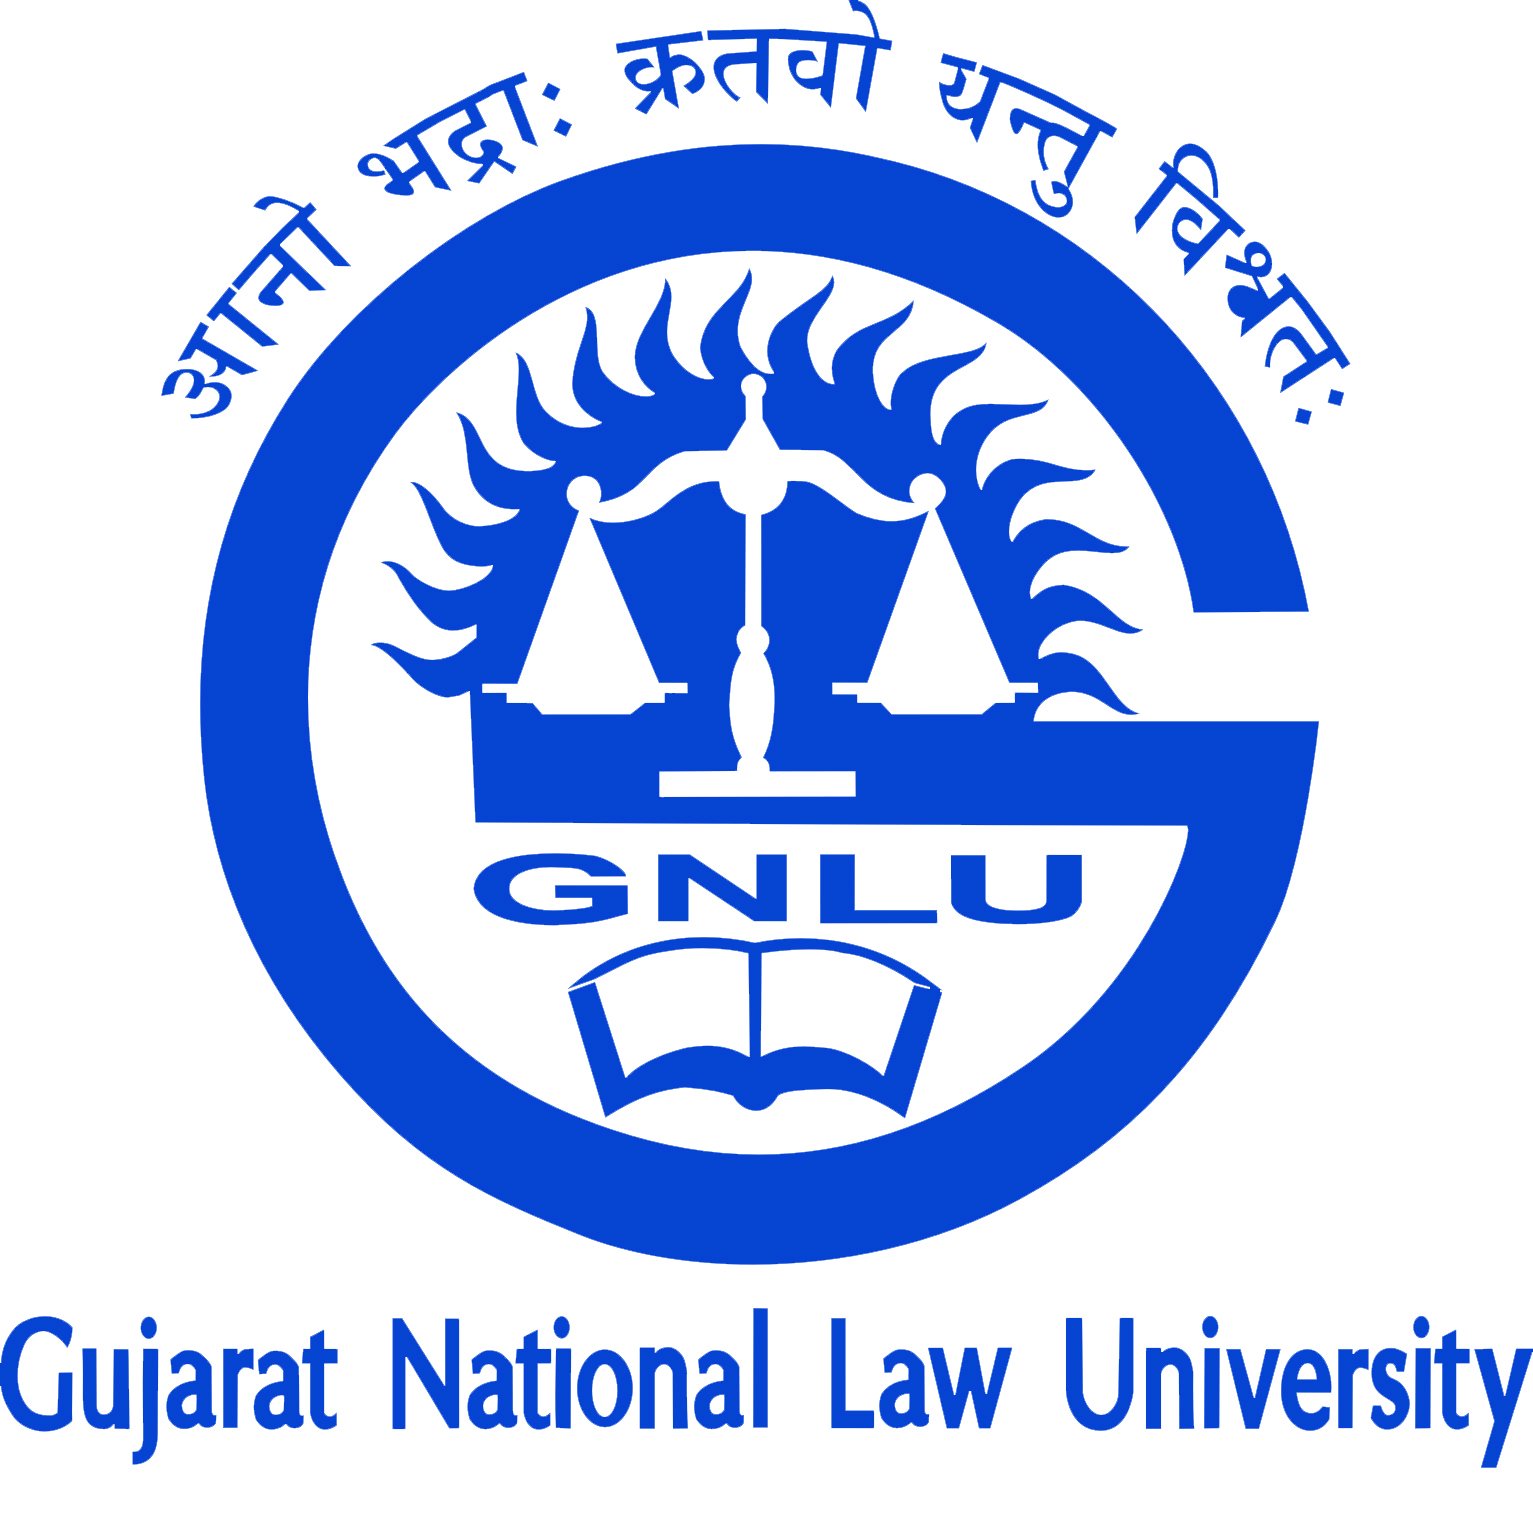 Online Certificate Course On ‘Child Rights In India’ By GNLU Centre For Women And Child Rights (GCWCR) [15 June-30 June 2023]: Register By 12th June 2023